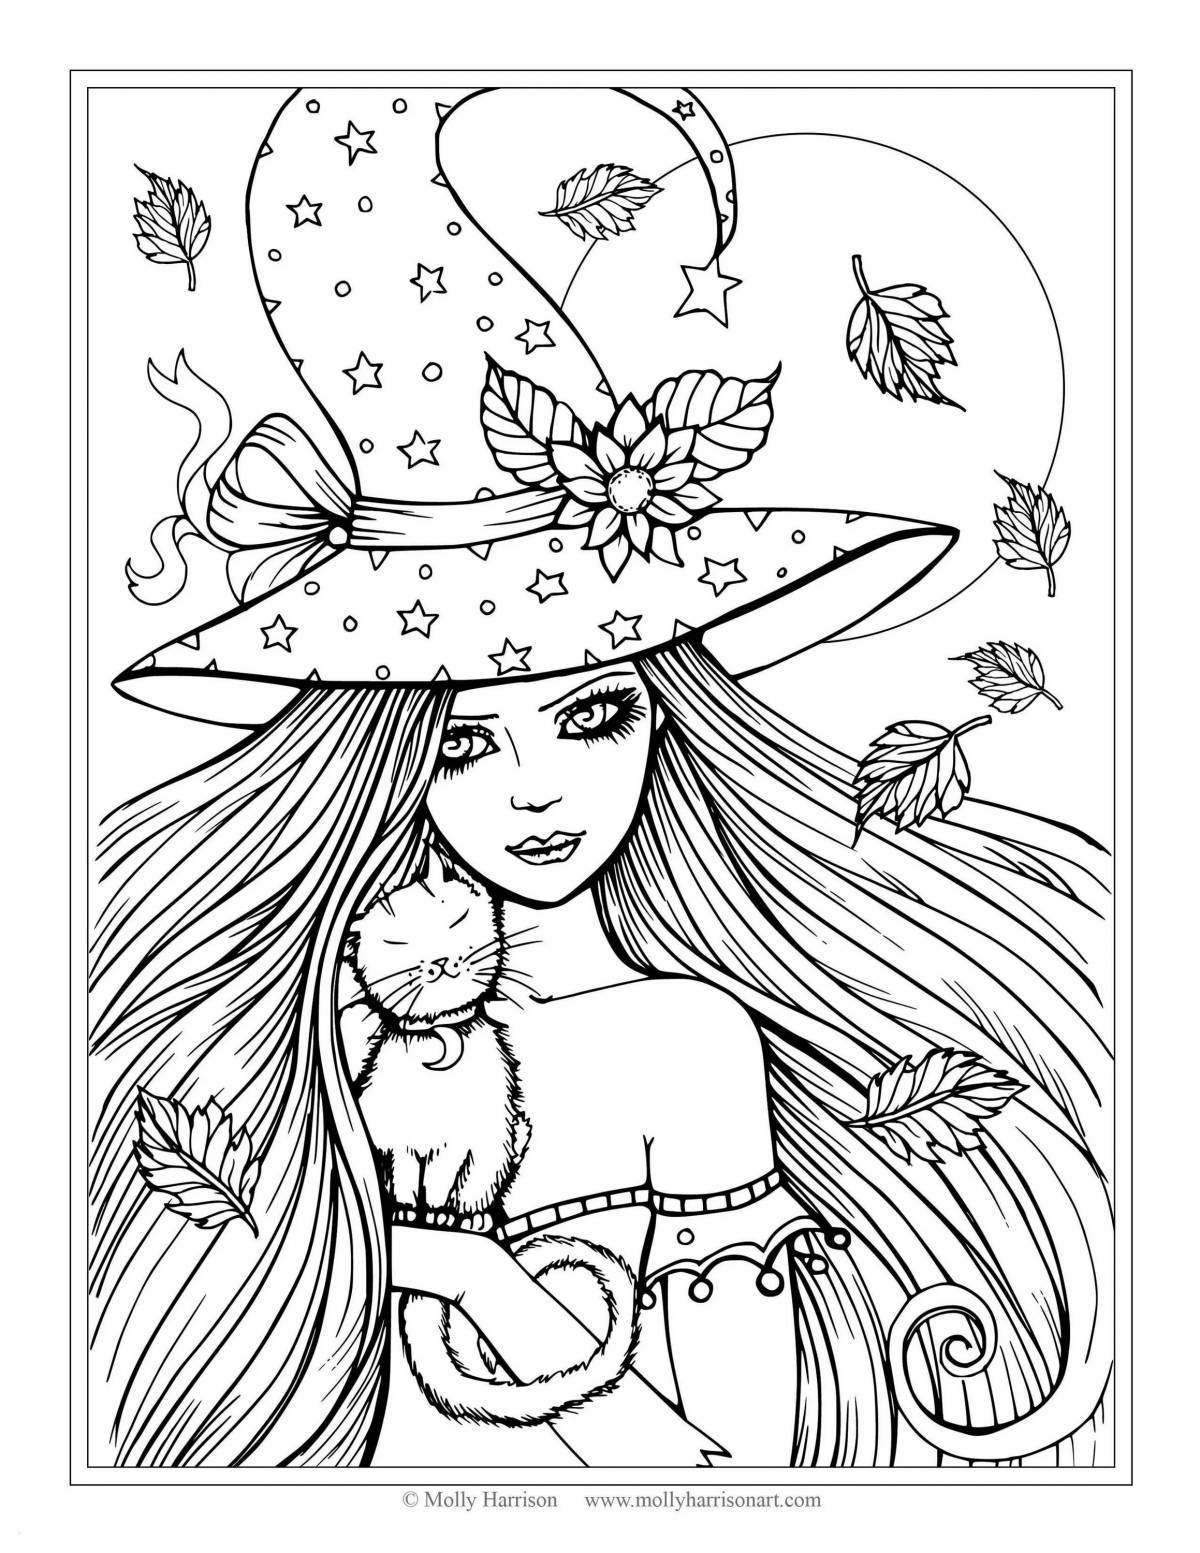 Magic coloring book for girls 15-17 years old